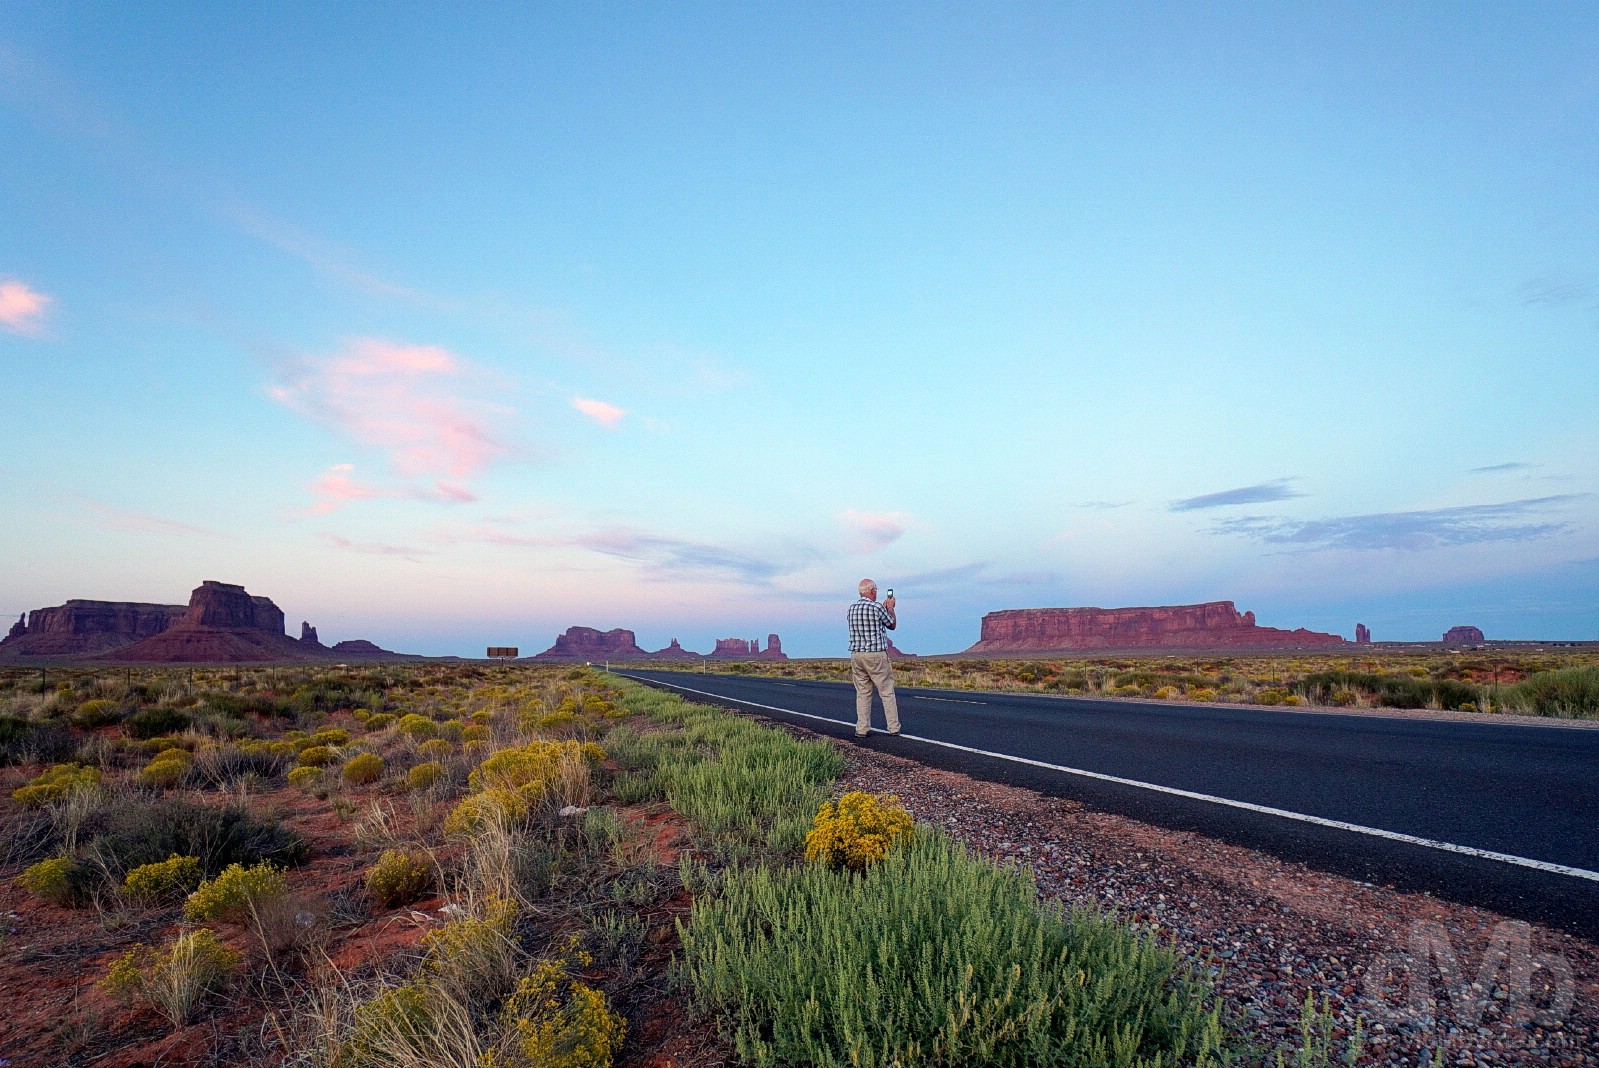 Capturing dusk by US Route 163 in Monument Valley, Utah, USA. September 10, 2016.